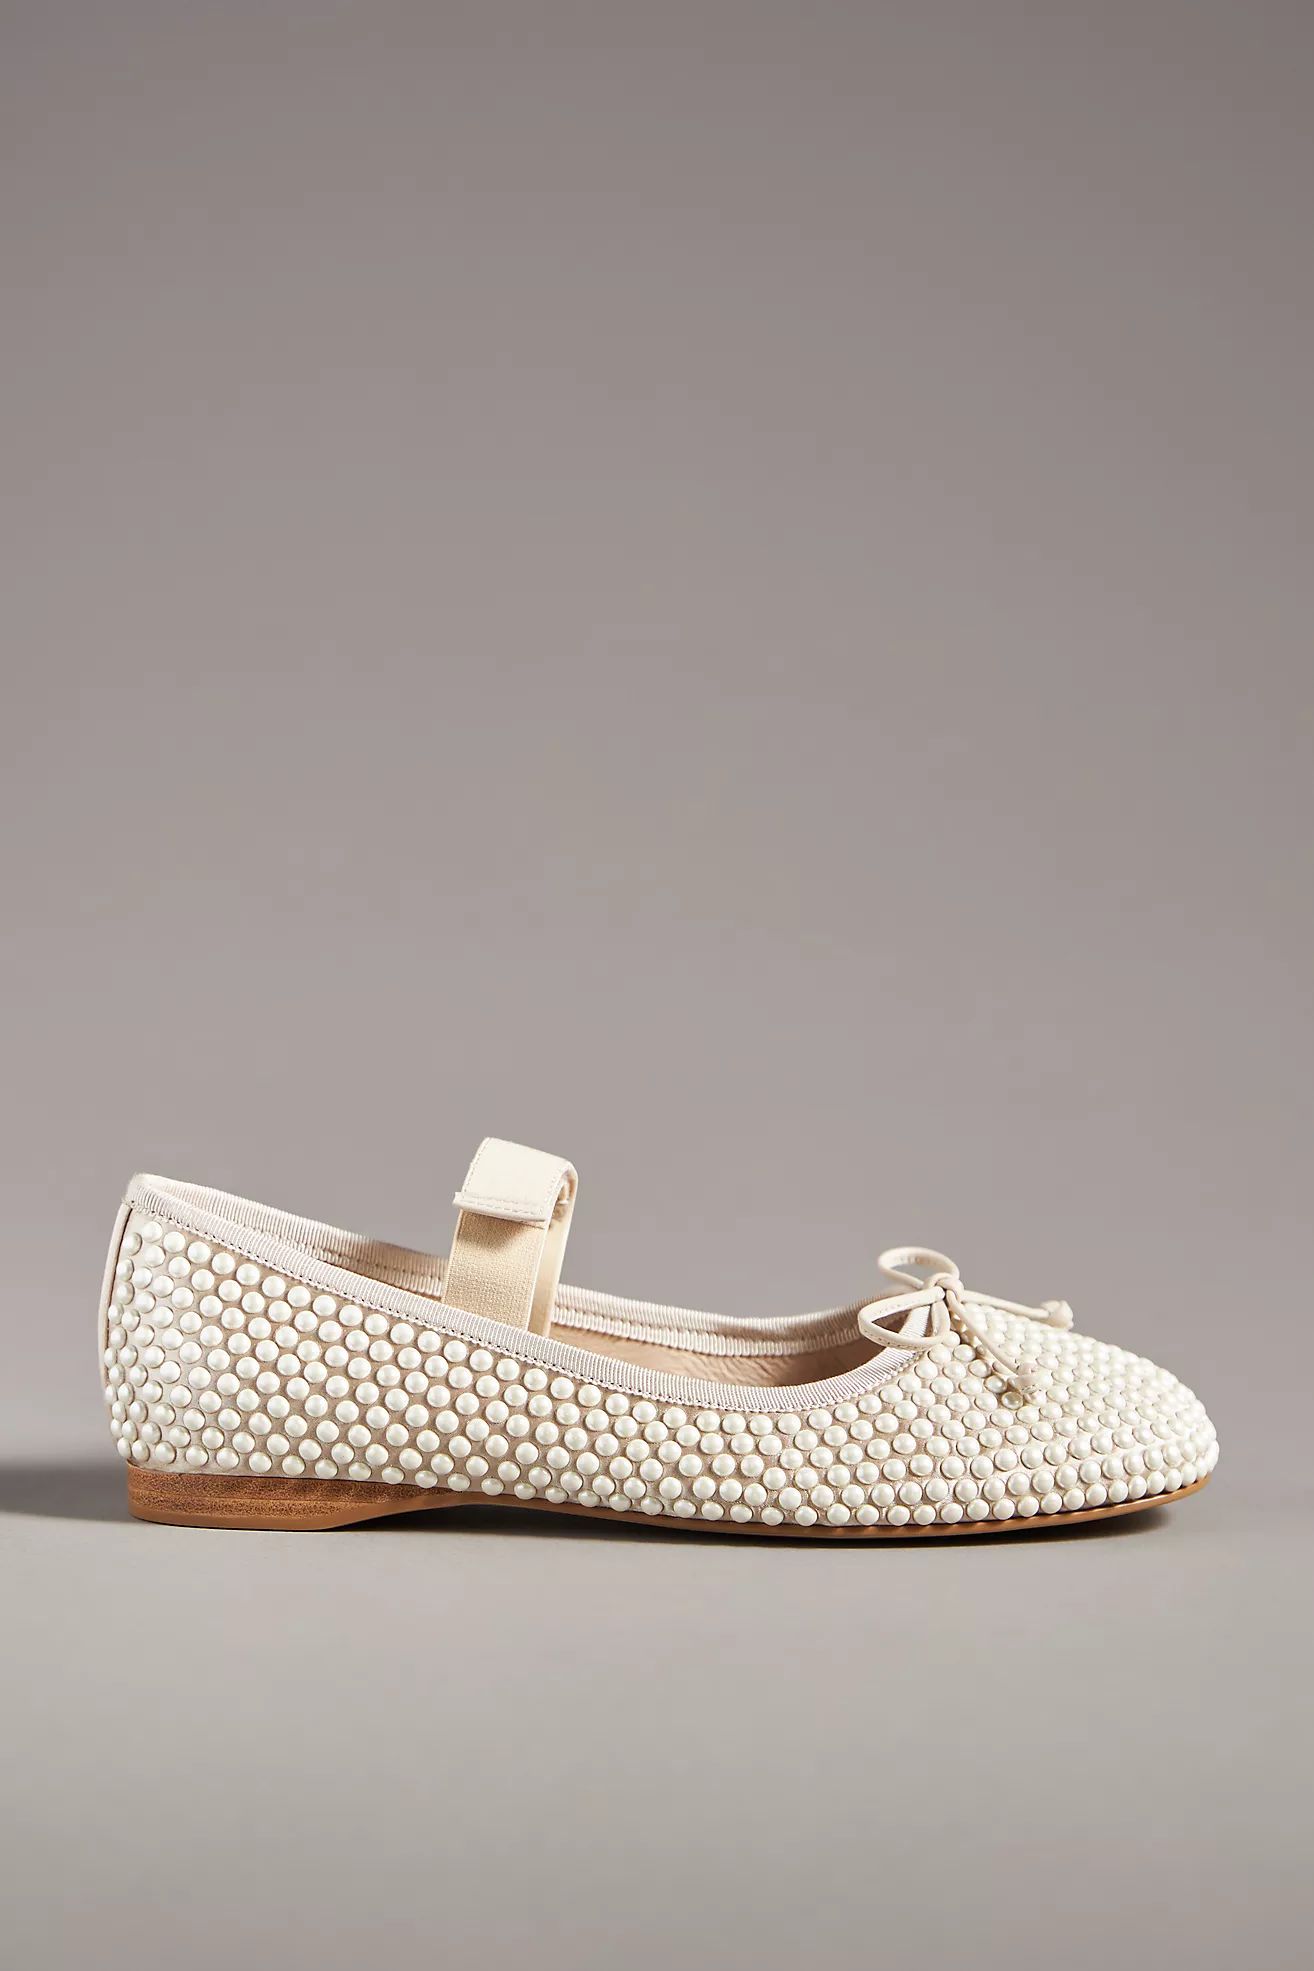 Jeffrey Campbell Pearl Flats | Anthropologie (US)